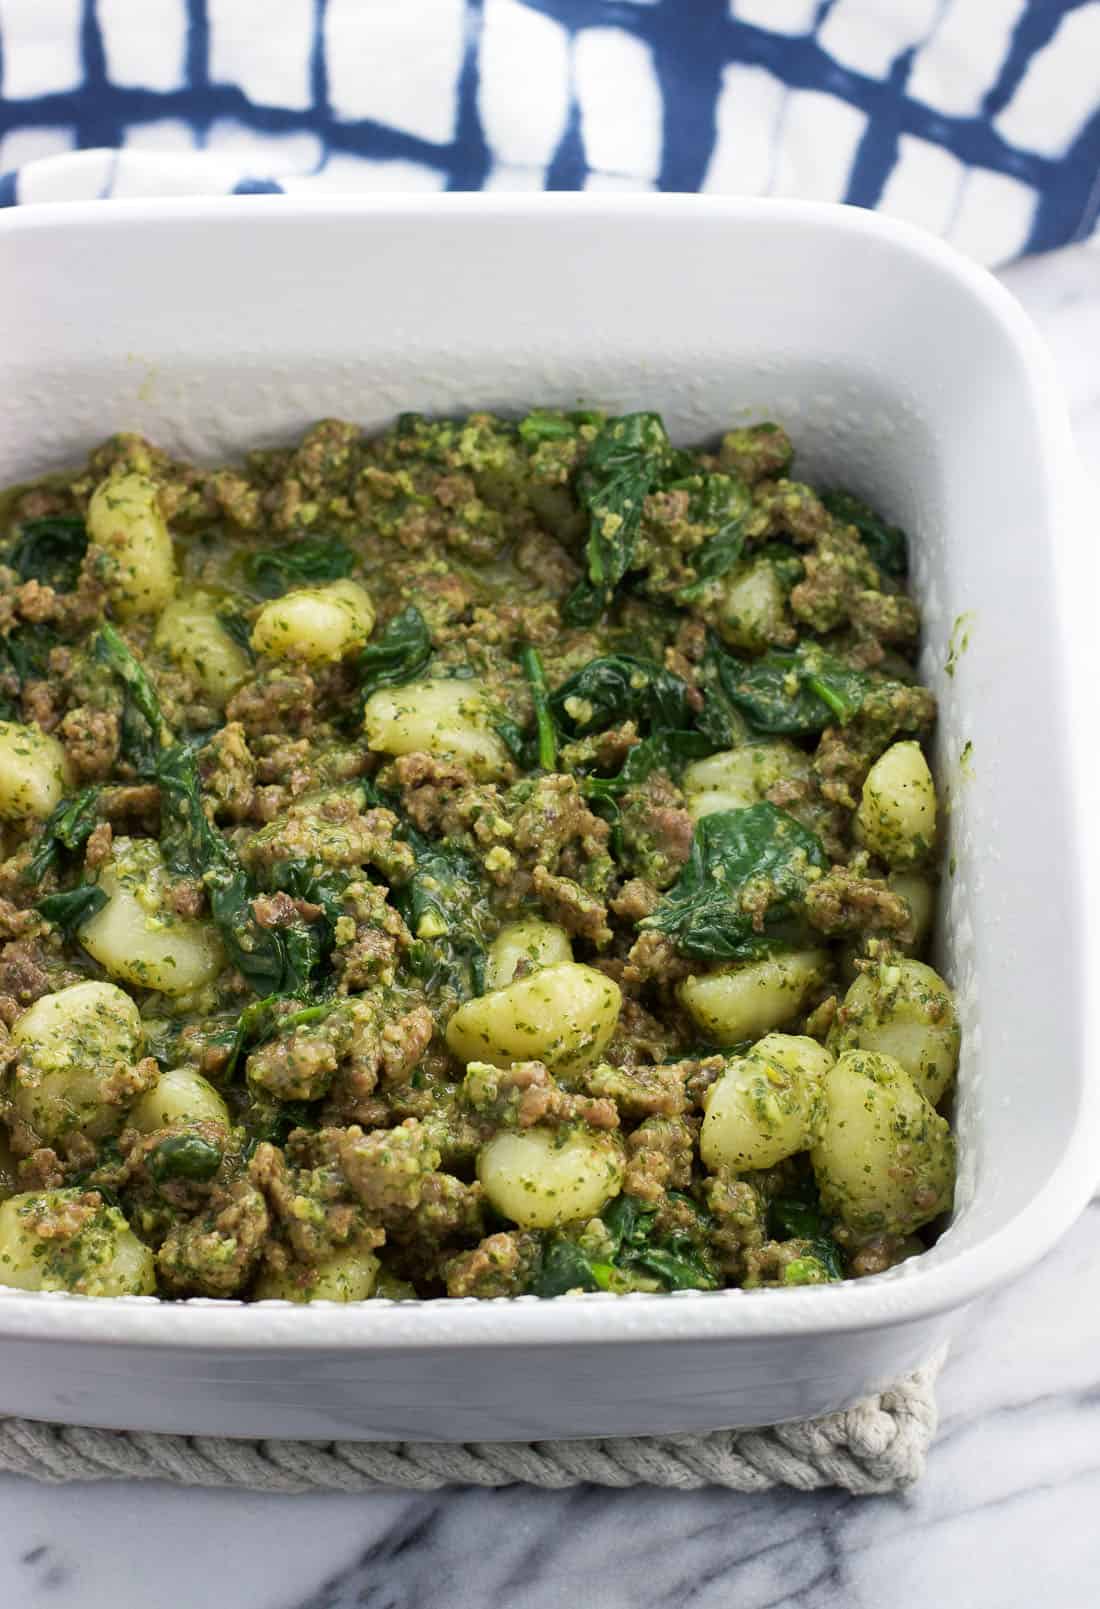 Gnocchi, crumbled sausage, spinach, and pesto sauce combined in a large square baking dish